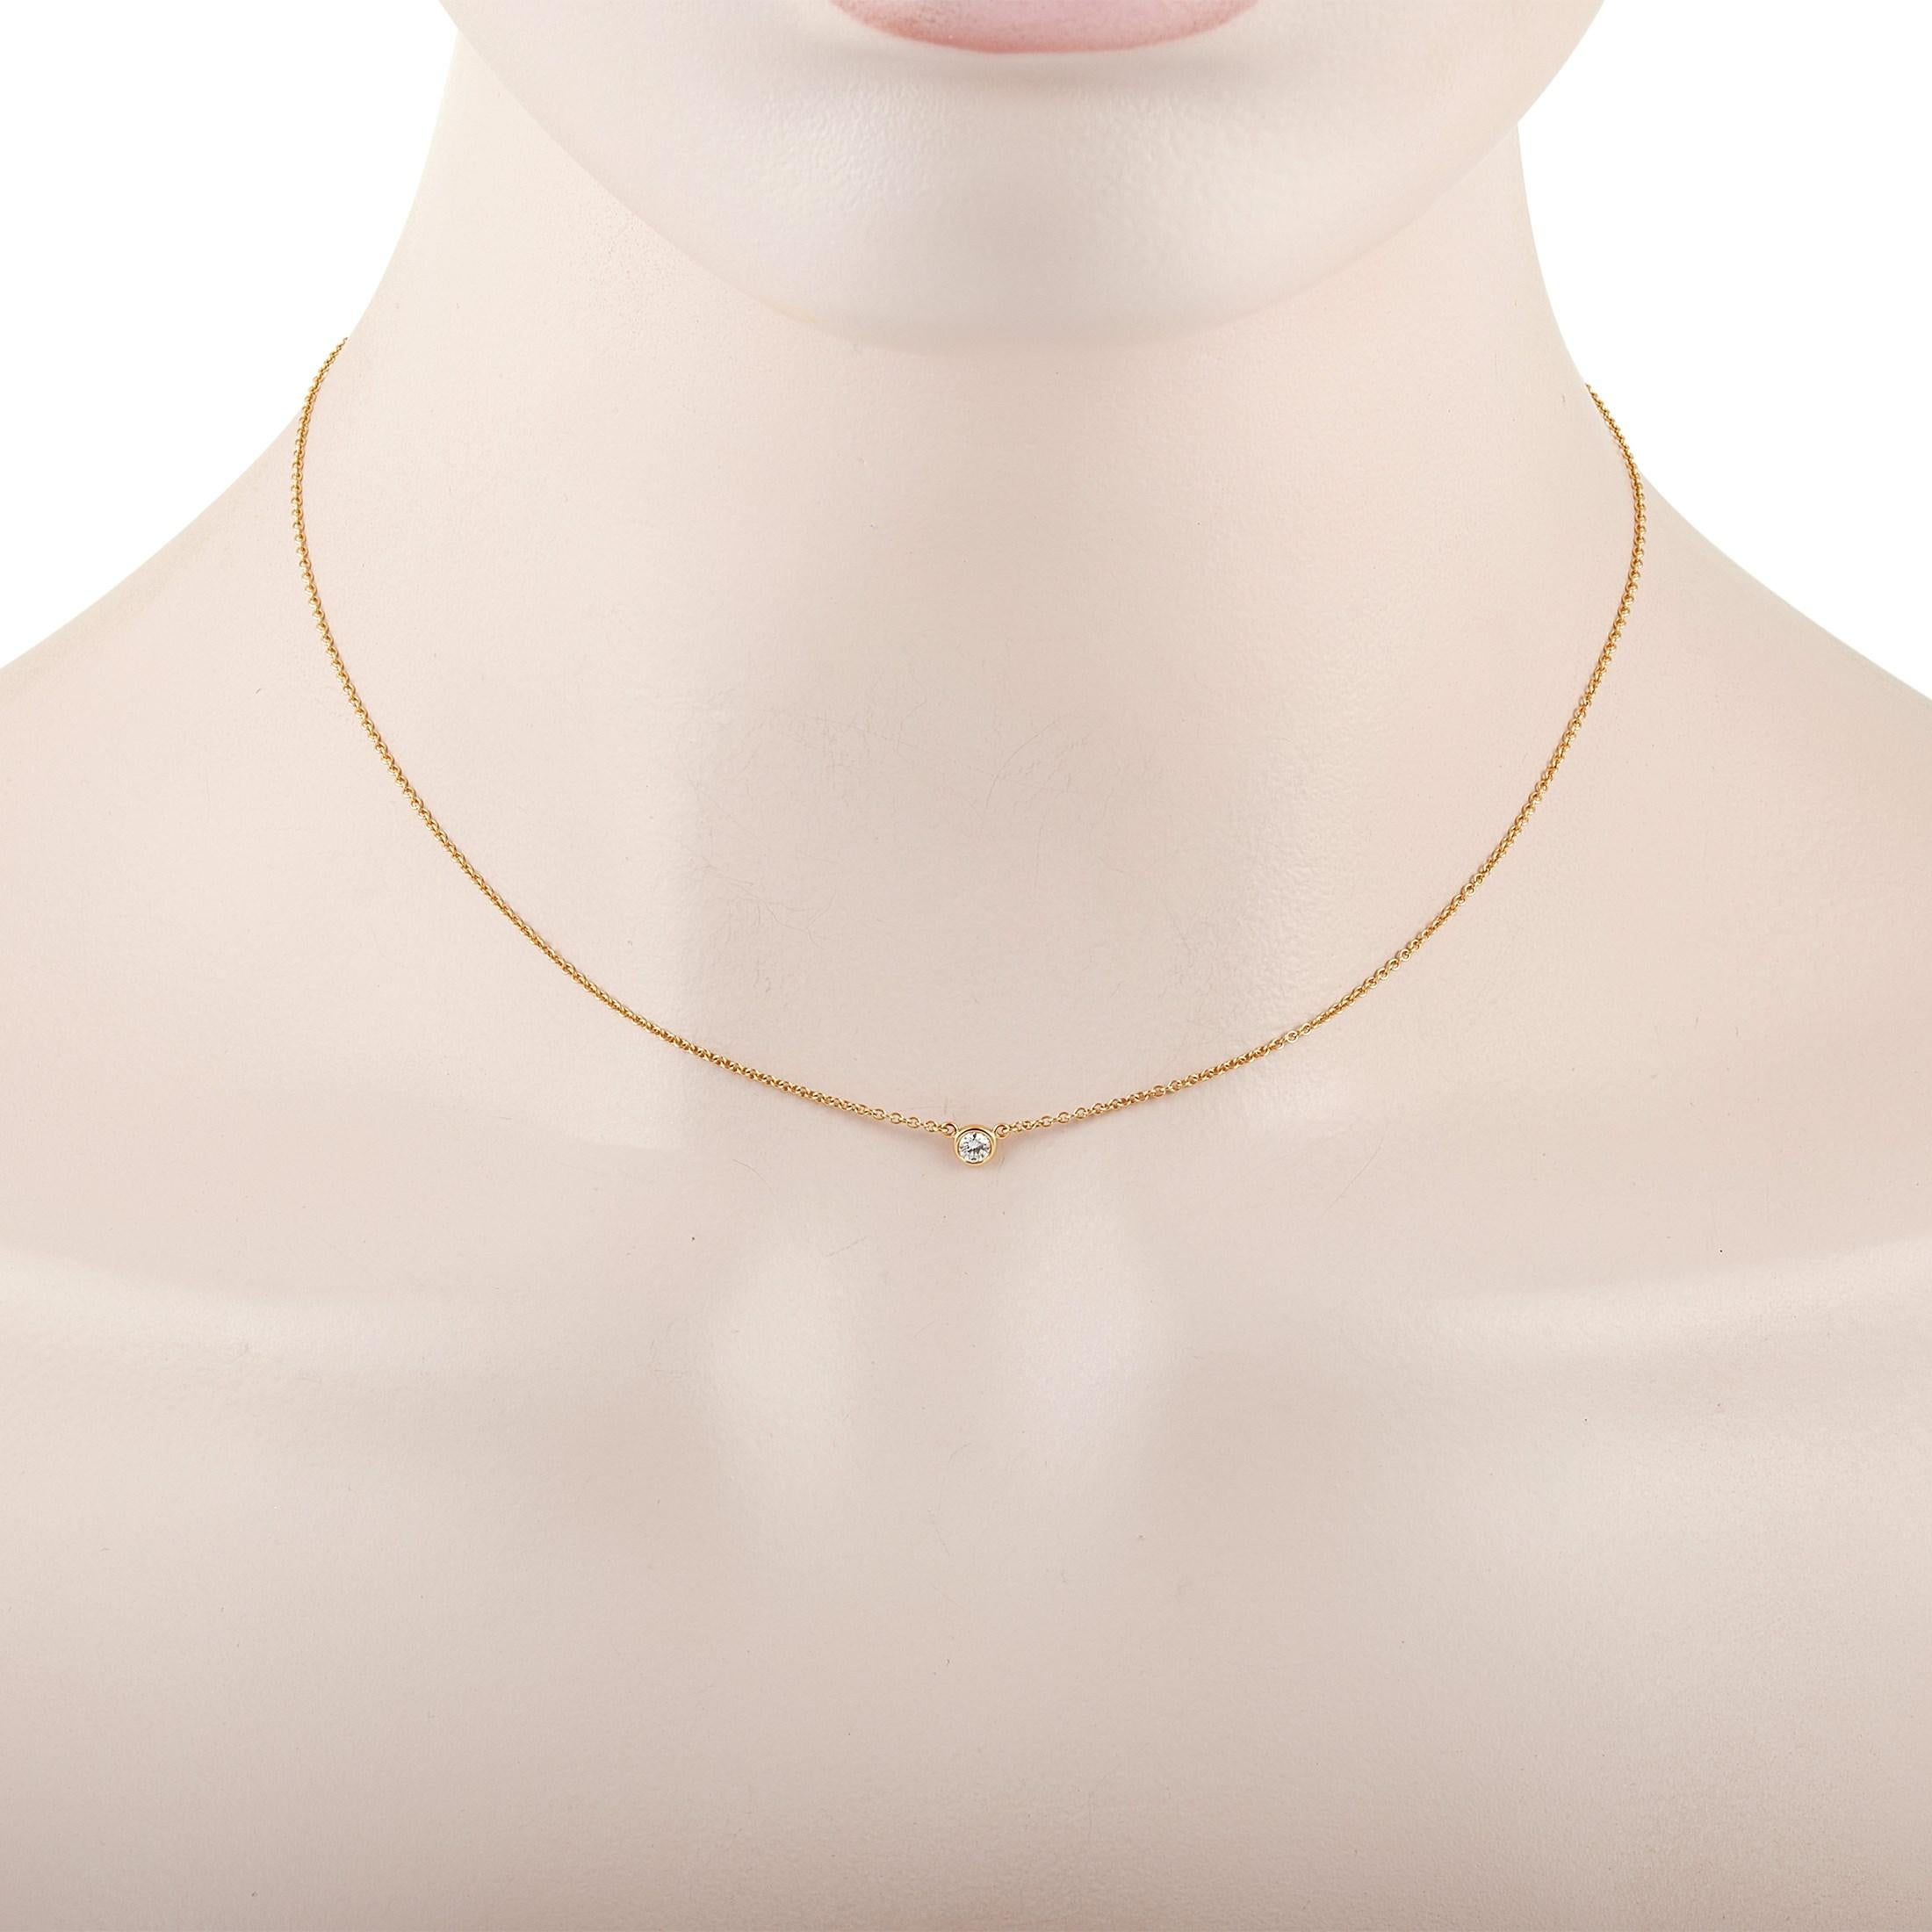 This classic Tiffany & Co. 18K Yellow Gold 0.08 ct Diamond necklace is made with 18K yellow gold and features a solitary 0.08 carat bezel-set diamond pendant. The delicate 18K Yellow Gold Chain measures 15 inches in length and features a spring-ring